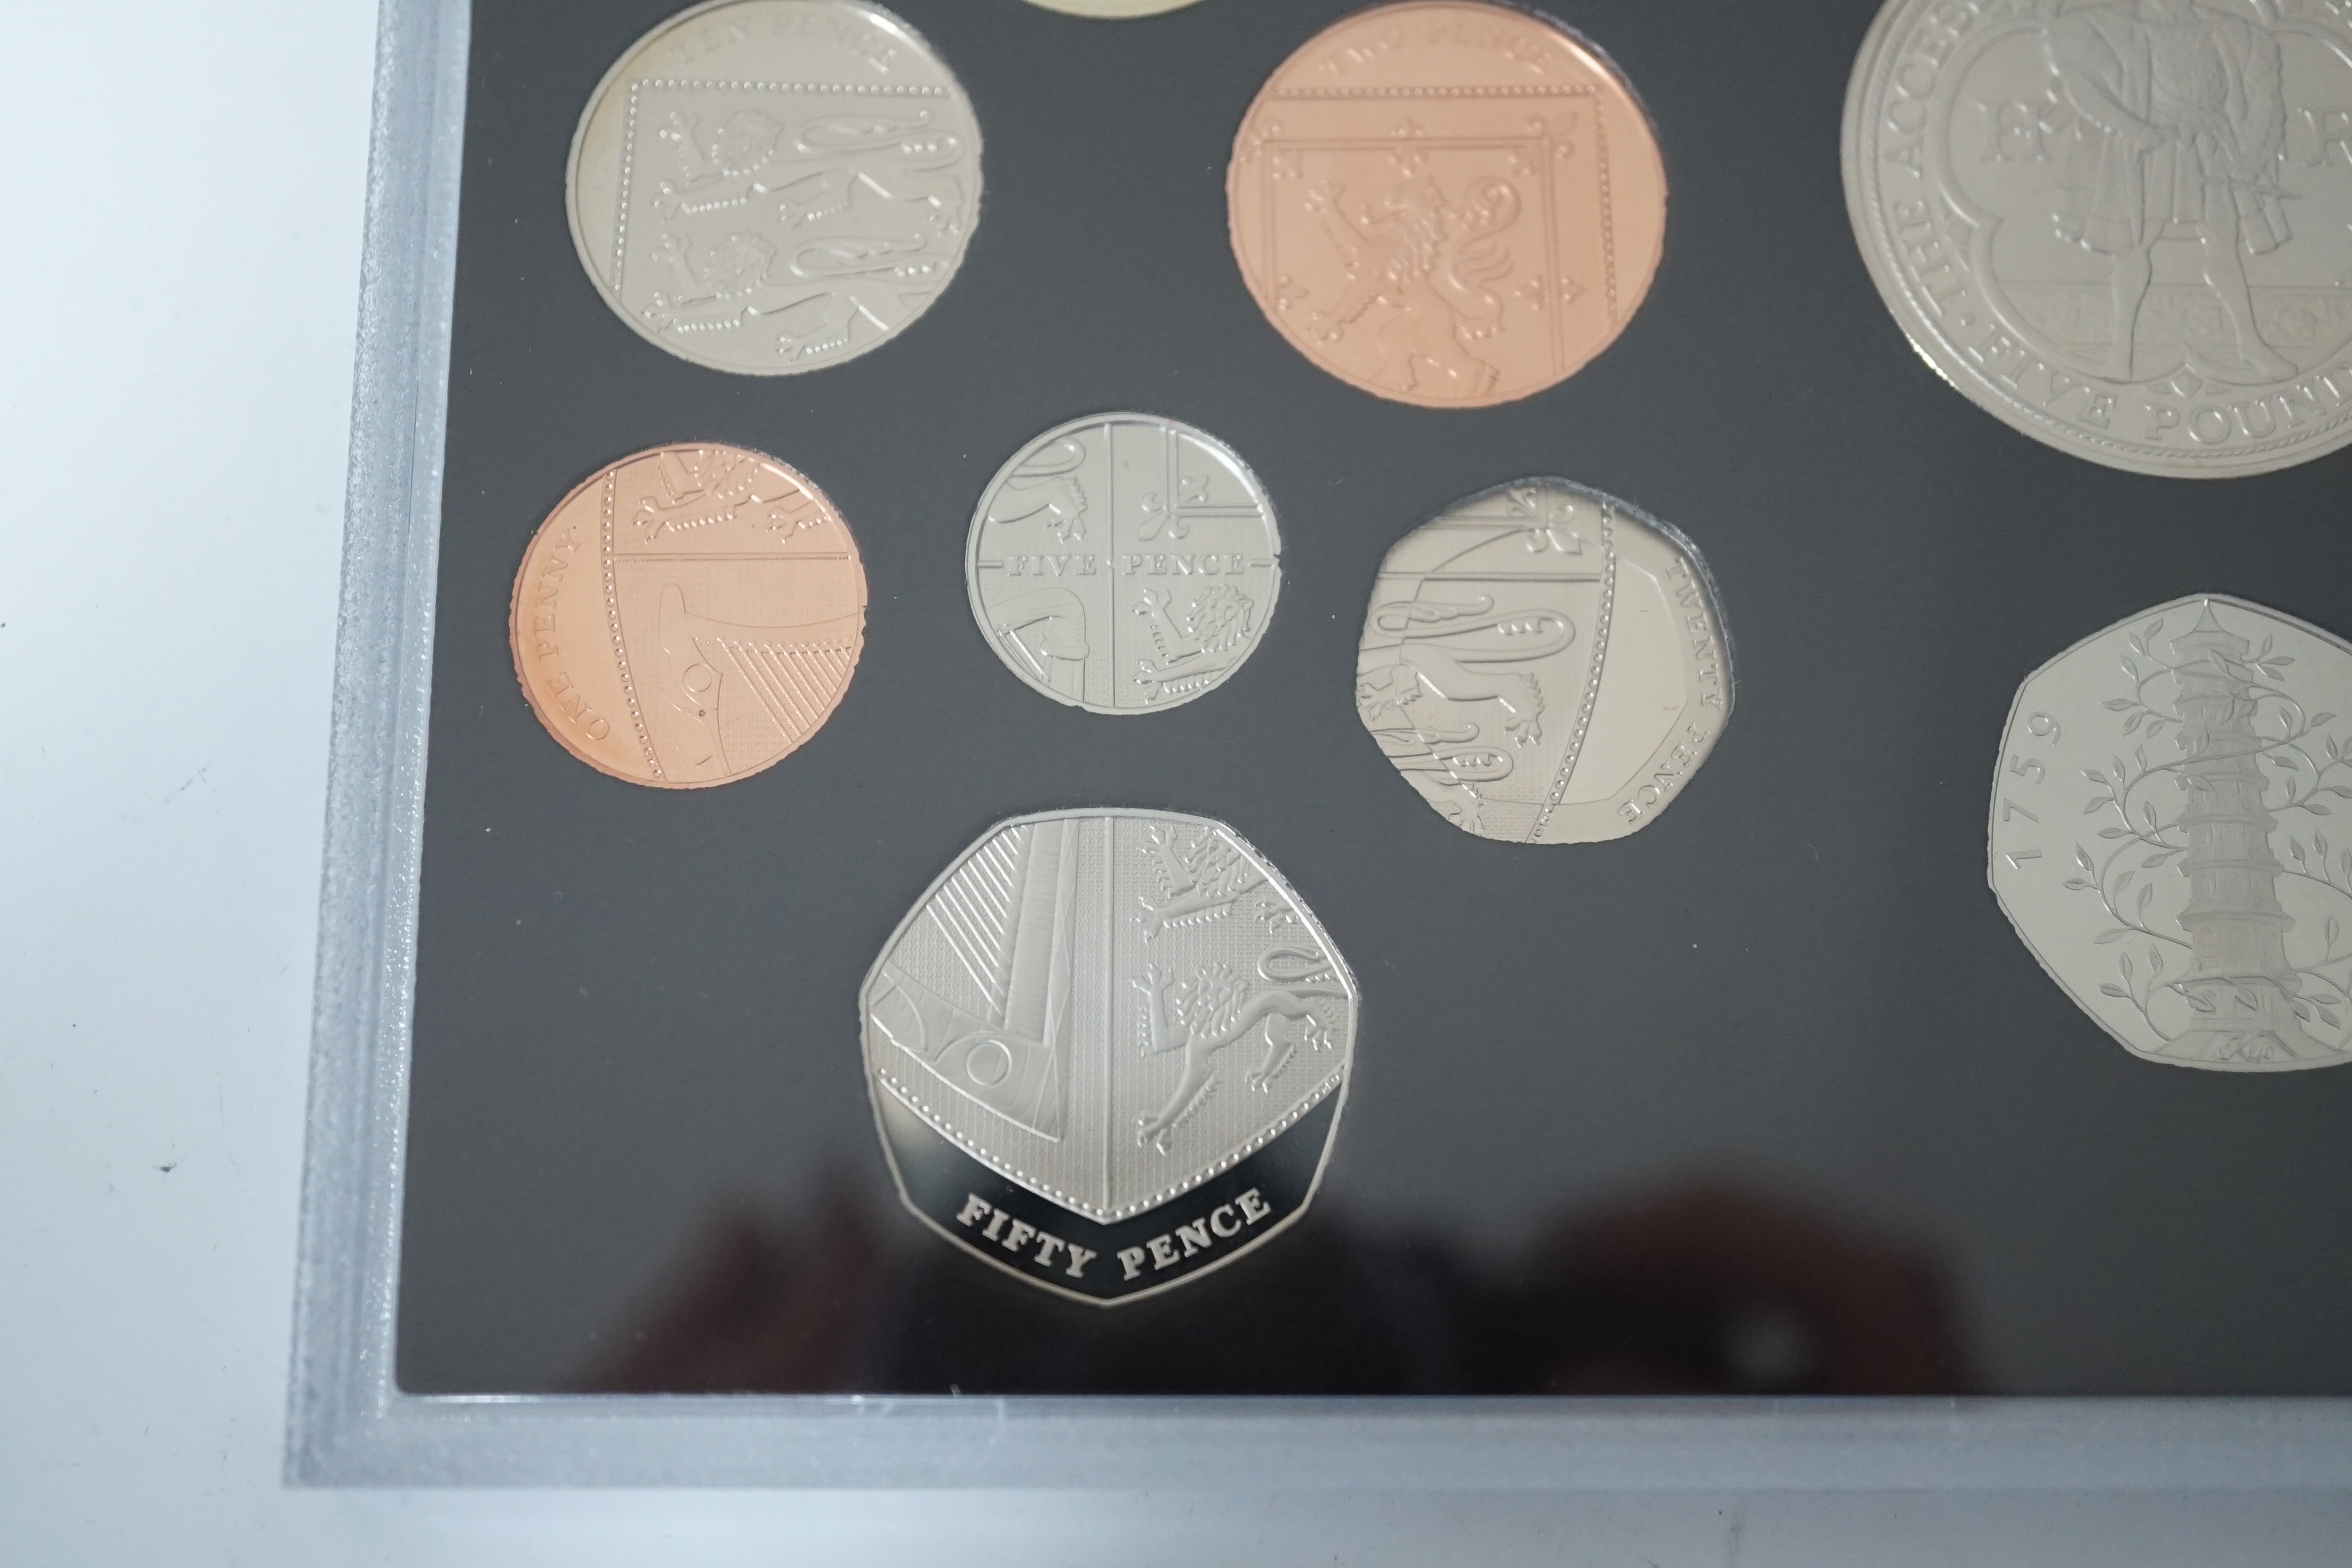 Elizabeth II proof coins, 2009 proof coin set, including the scarce Kew Gardens 50p